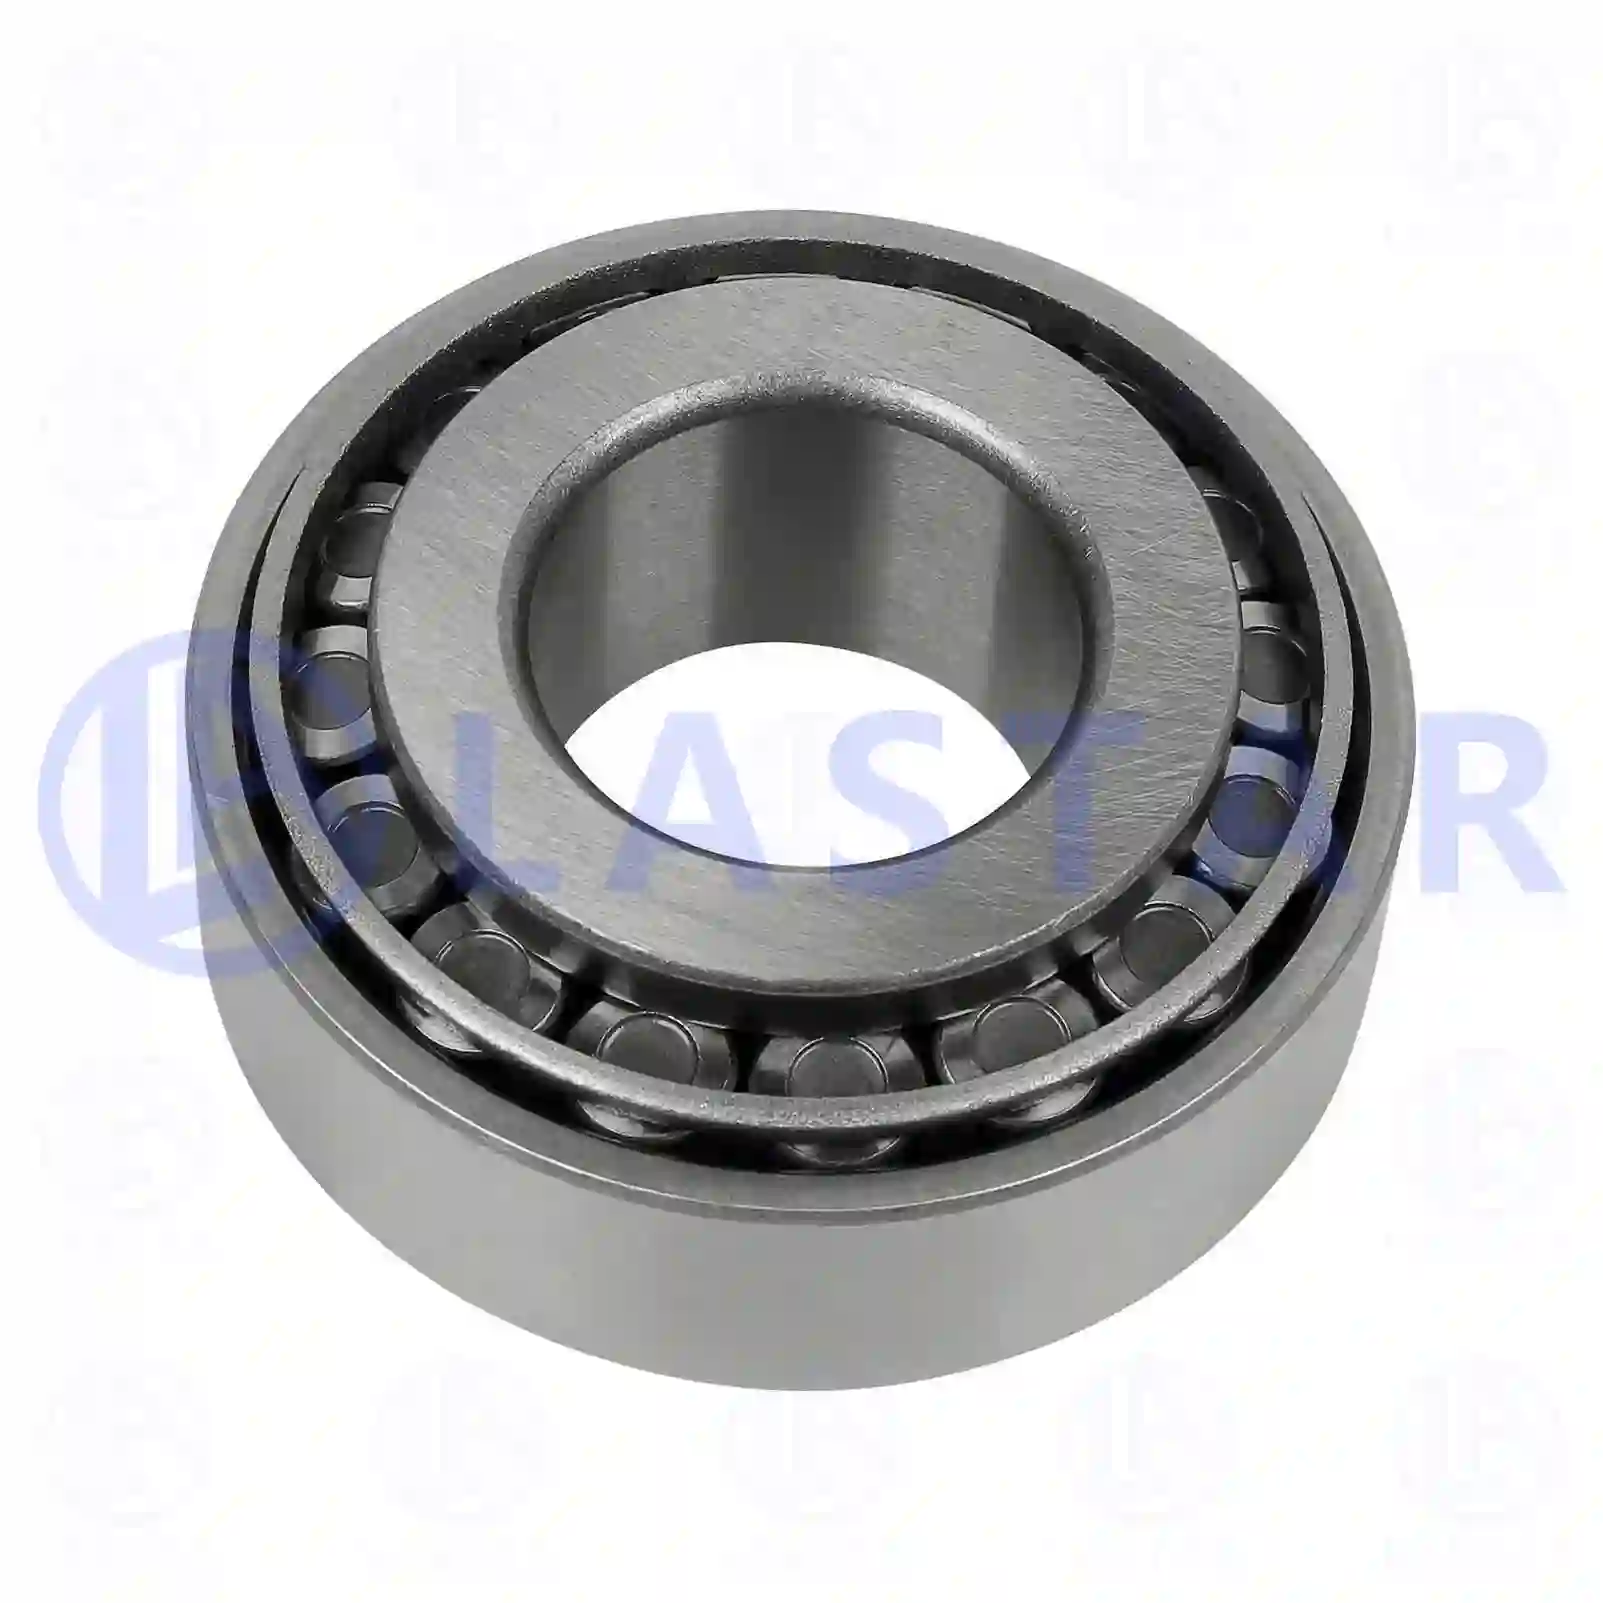 King Pin Kit Tapered roller bearing, la no: 77730283 ,  oem no:26800580, 01126887, 02049337, 07164503, 26800580, 06324990015, 34934200000, 87523400600, A0857596100, 0029816305, 0029816405, 2576334031, 38120-76500, 14698, 181669, 1911816, 322747, 11074, 181668, 181669 Lastar Spare Part | Truck Spare Parts, Auotomotive Spare Parts